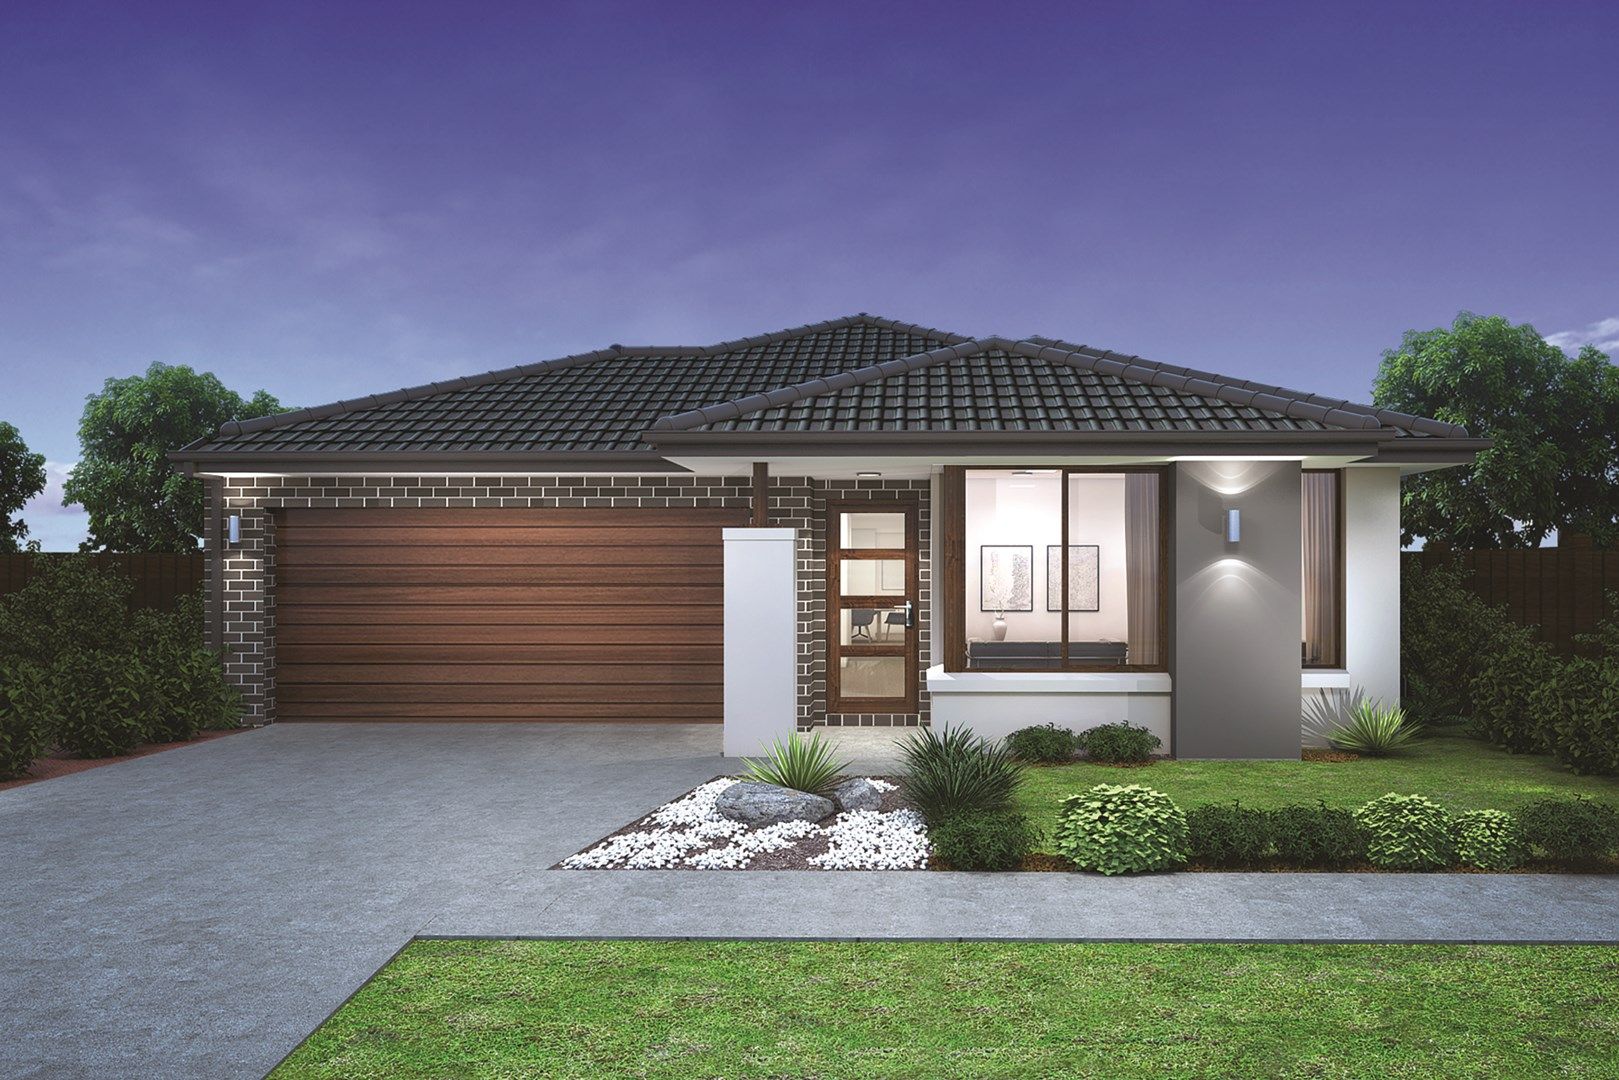 4 bedrooms New House & Land in Lot 1125 ATTWELL Estate DEANSIDE VIC, 3336